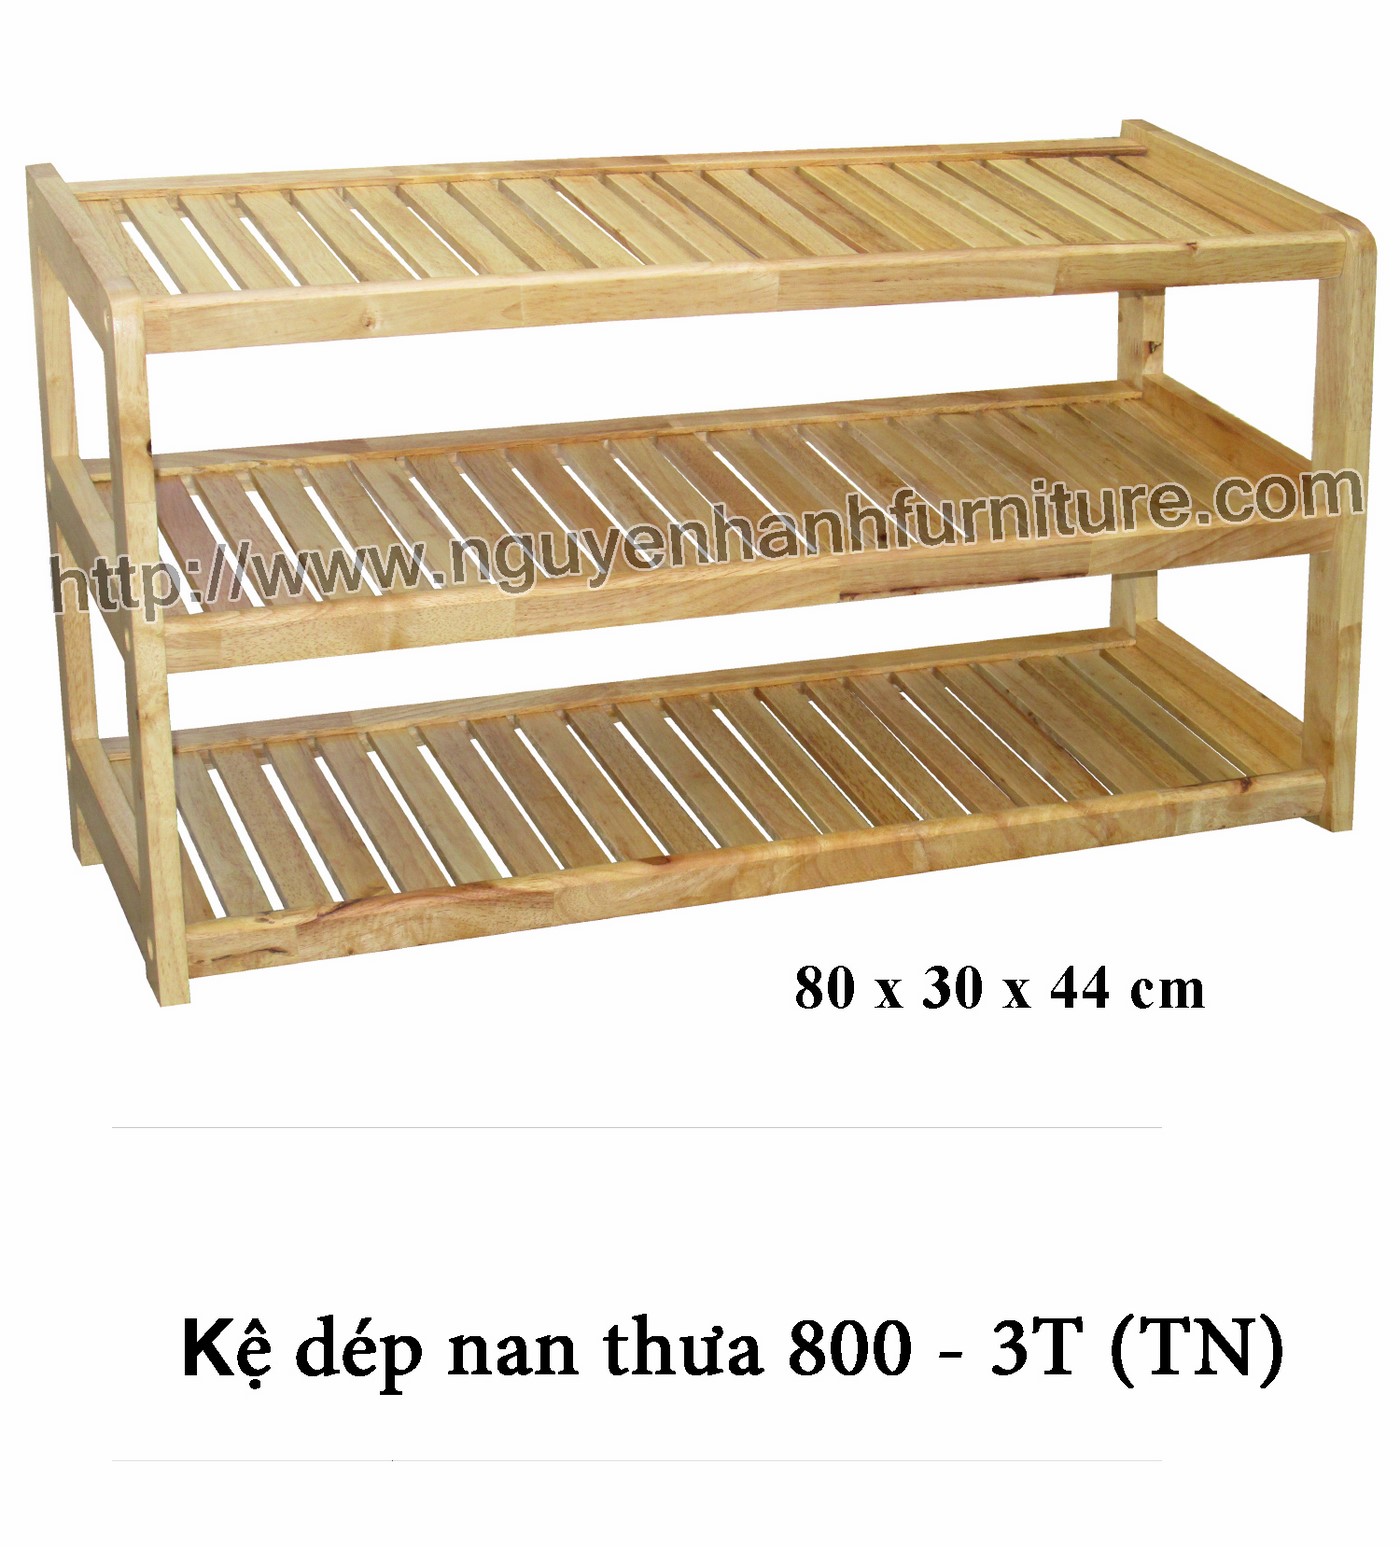 Name product: Shoeshelf 3 Floors 80 with sparse blades (Natural) - Dimensions: 80 x 30 x 45 (H) - Description: Wood natural rubber